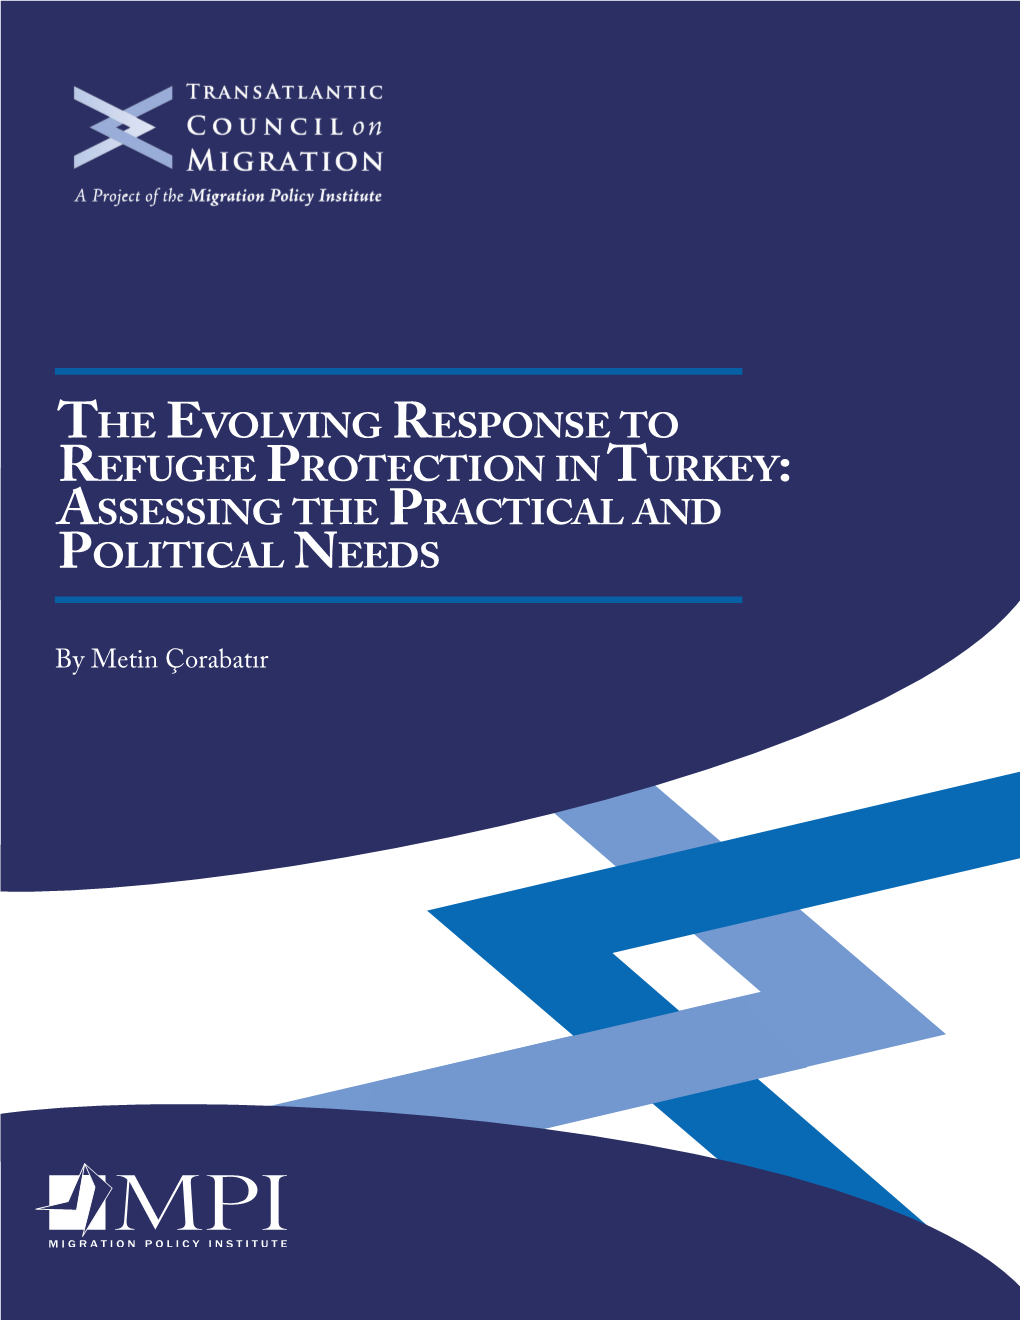 The Evolving Response to Refugee Protection in Turkey: Assessing the Practical and Political Needs